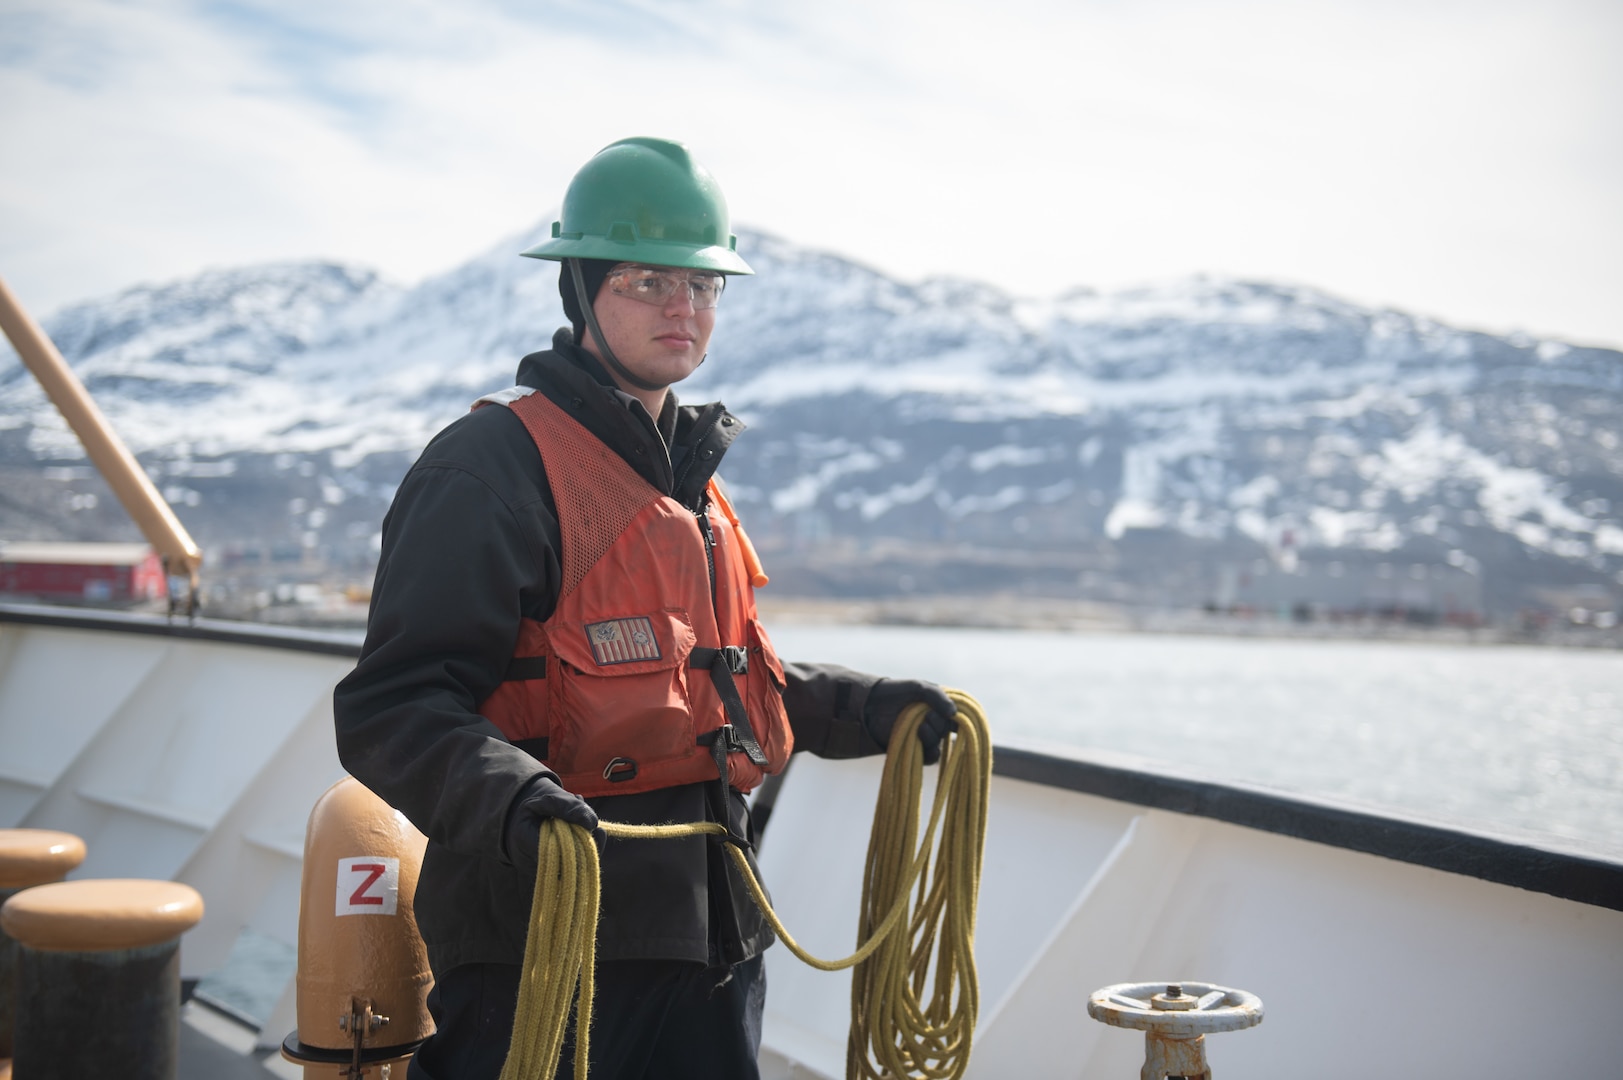 U.S. Coast Guard Seaman Griffin Peterson, a crewmember aboard USCGC Sycamore (WLB 209), prepares to throw a heaving line while mooring in Nuuk, Greenland, June 10, 2023. Sycamore is participating in Exercise Argus, a joint search and rescue and marine environmental response exercise that includes assets from the United States, Denmark, Greenland, and France. (U.S. Coast Guard photo by Petty Officer 2nd Class Ryan Schultz)